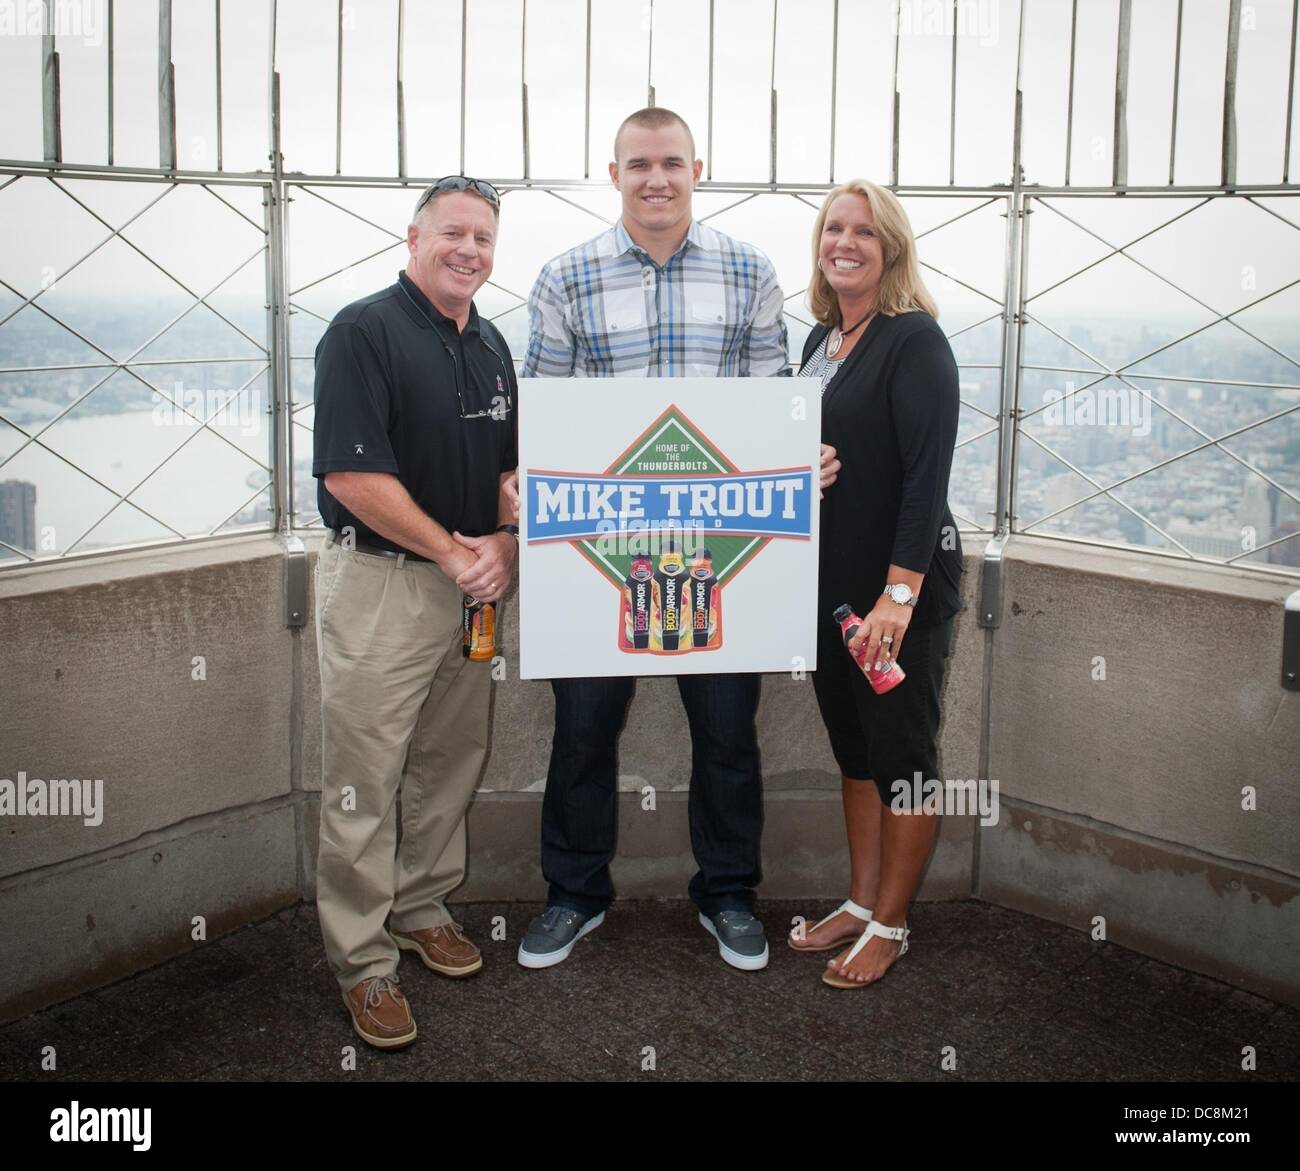 Manhattan, New York, USA. 12th Aug, 2013. Los Angeles Angels of Anaheim outfielder MIKE TROUT, with his parents Jeff and Debbie, tours the Empire State Building's 86th floor Observatory and is interviewed at Foley's NY Pub & Restaurant on 33rd Street, Monday, August 12, 2013. Credit:  Bryan Smith/ZUMAPRESS.com/Alamy Live News Stock Photo